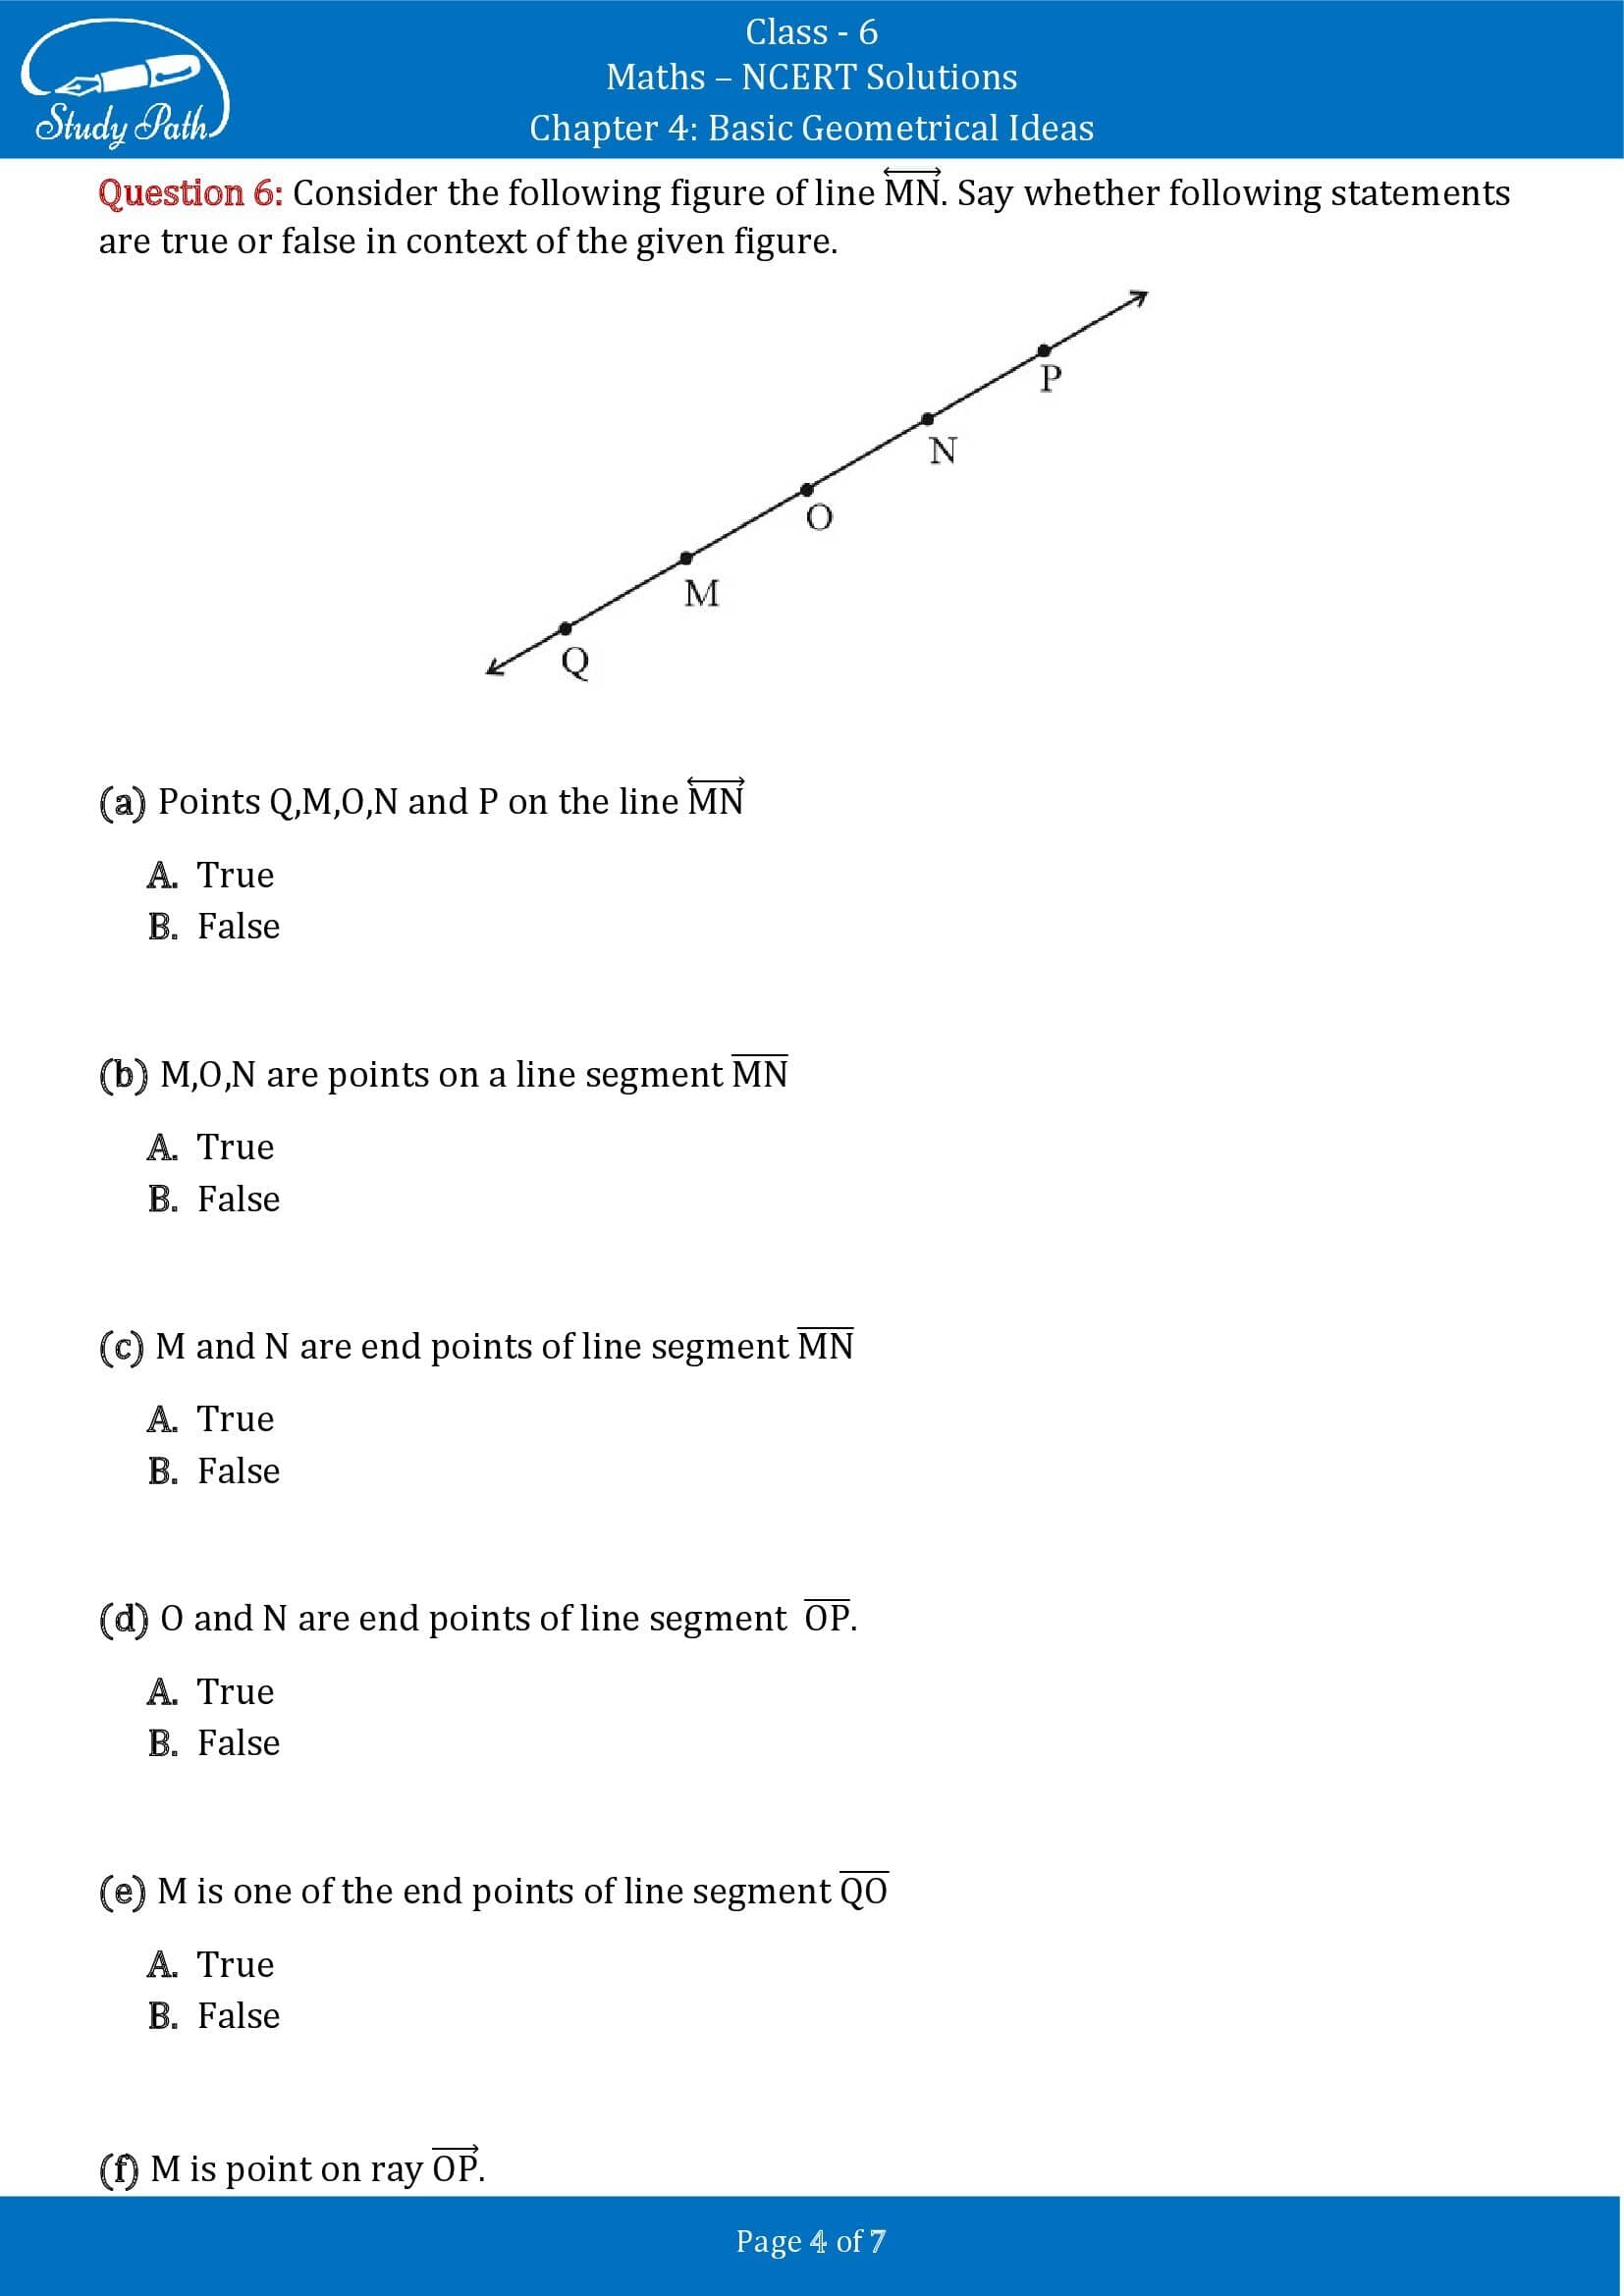 NCERT Solutions for Class 6 Maths Chapter 4 Basic Geometrical Ideas Exercise 4.1 00004